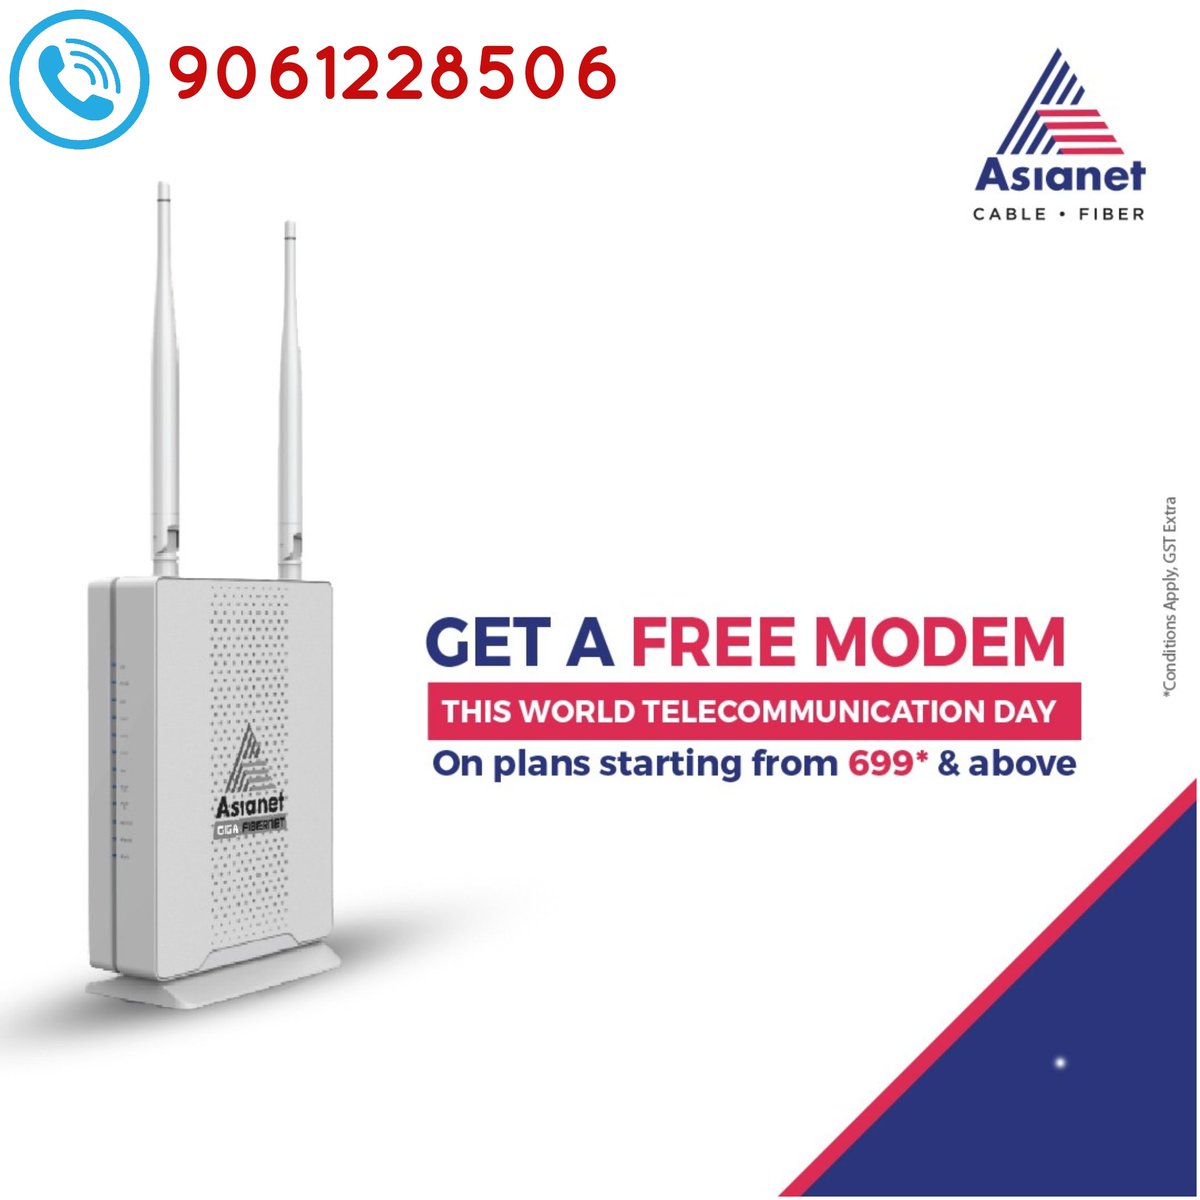 🥳🥳🥳Tomorrow is world telecommunication day...🌟💥💥🌟Amazing once in a blue moon offer of free modem for just one day only.✨🌟✨. Monthly plans starting from 699 onwards are eligible for this offer 💫✨💫.. 

#AsianetFiber #dineeshkumarcd